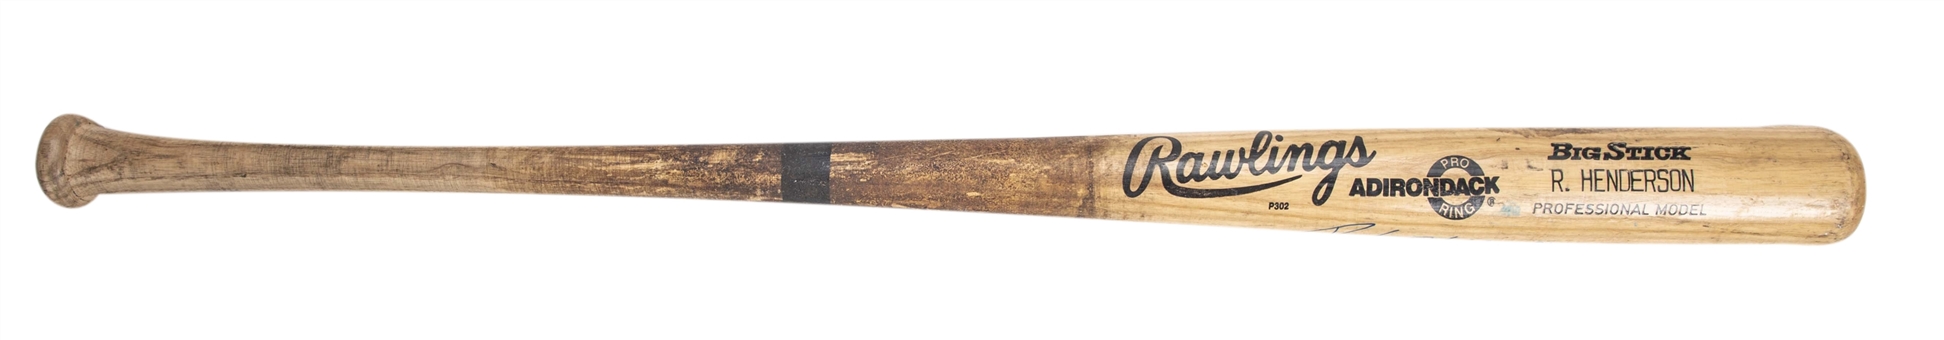 1988 Rickey Henderson Game Used & Signed Rawlings 454B Model Bat From The Willie Randolph Collection (PSA/DNA GU 8.5 & Randolph LOA)